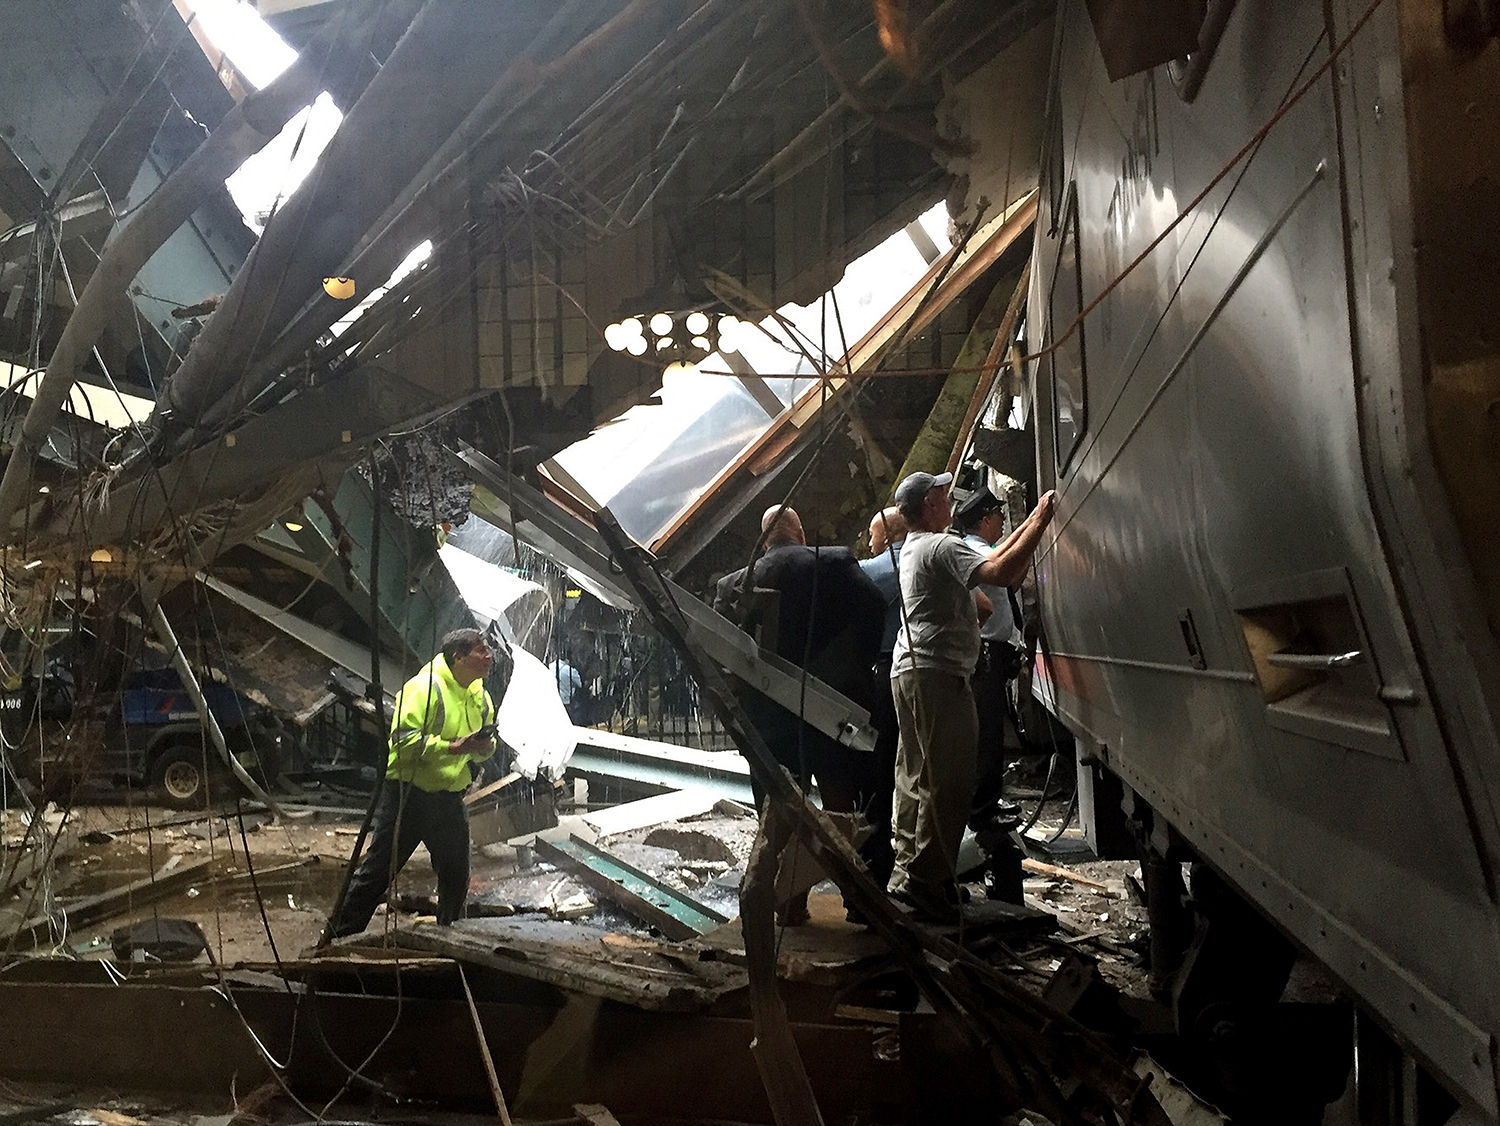 HOBOKEN, NJ - SEPTEMBER 29: Train personel survey the NJ Transit train that crashed in to the platform at the Hoboken Terminal September 29, 2016 in Hoboken, New Jersey. Pancho Bernasconi/Getty Images/AFP == FOR NEWSPAPERS, INTERNET, TELCOS & TELEVISION USE ONLY == / TT / kod 444